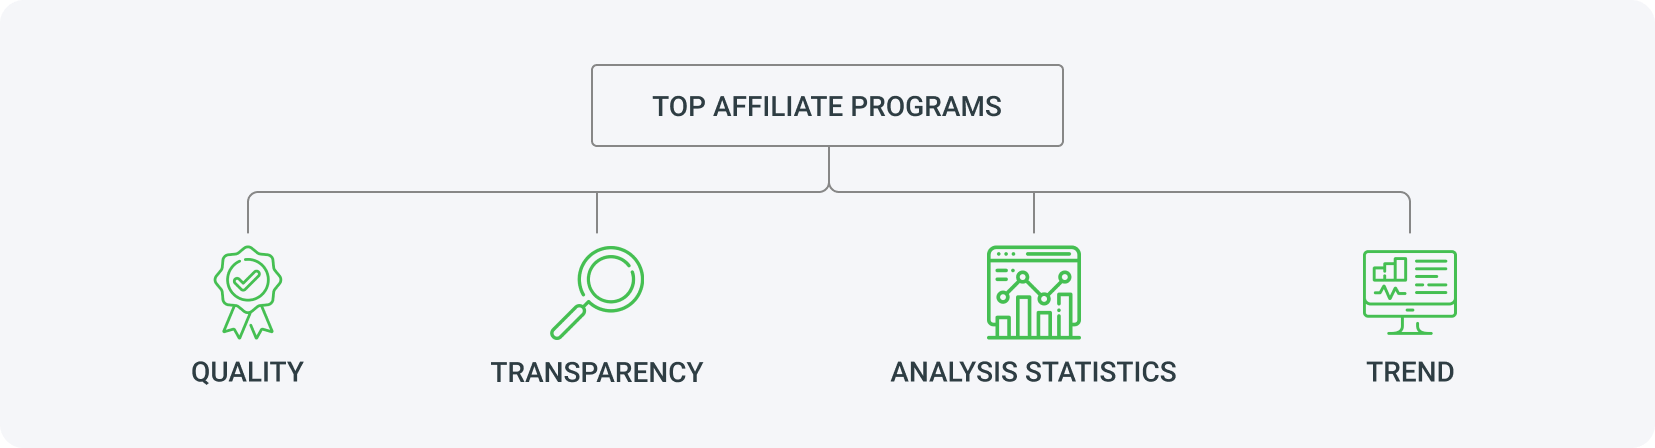 The best affiliate programs in 2023 from MyLead are selected based on quality, transparency, market trend analysis, and data-driven results.